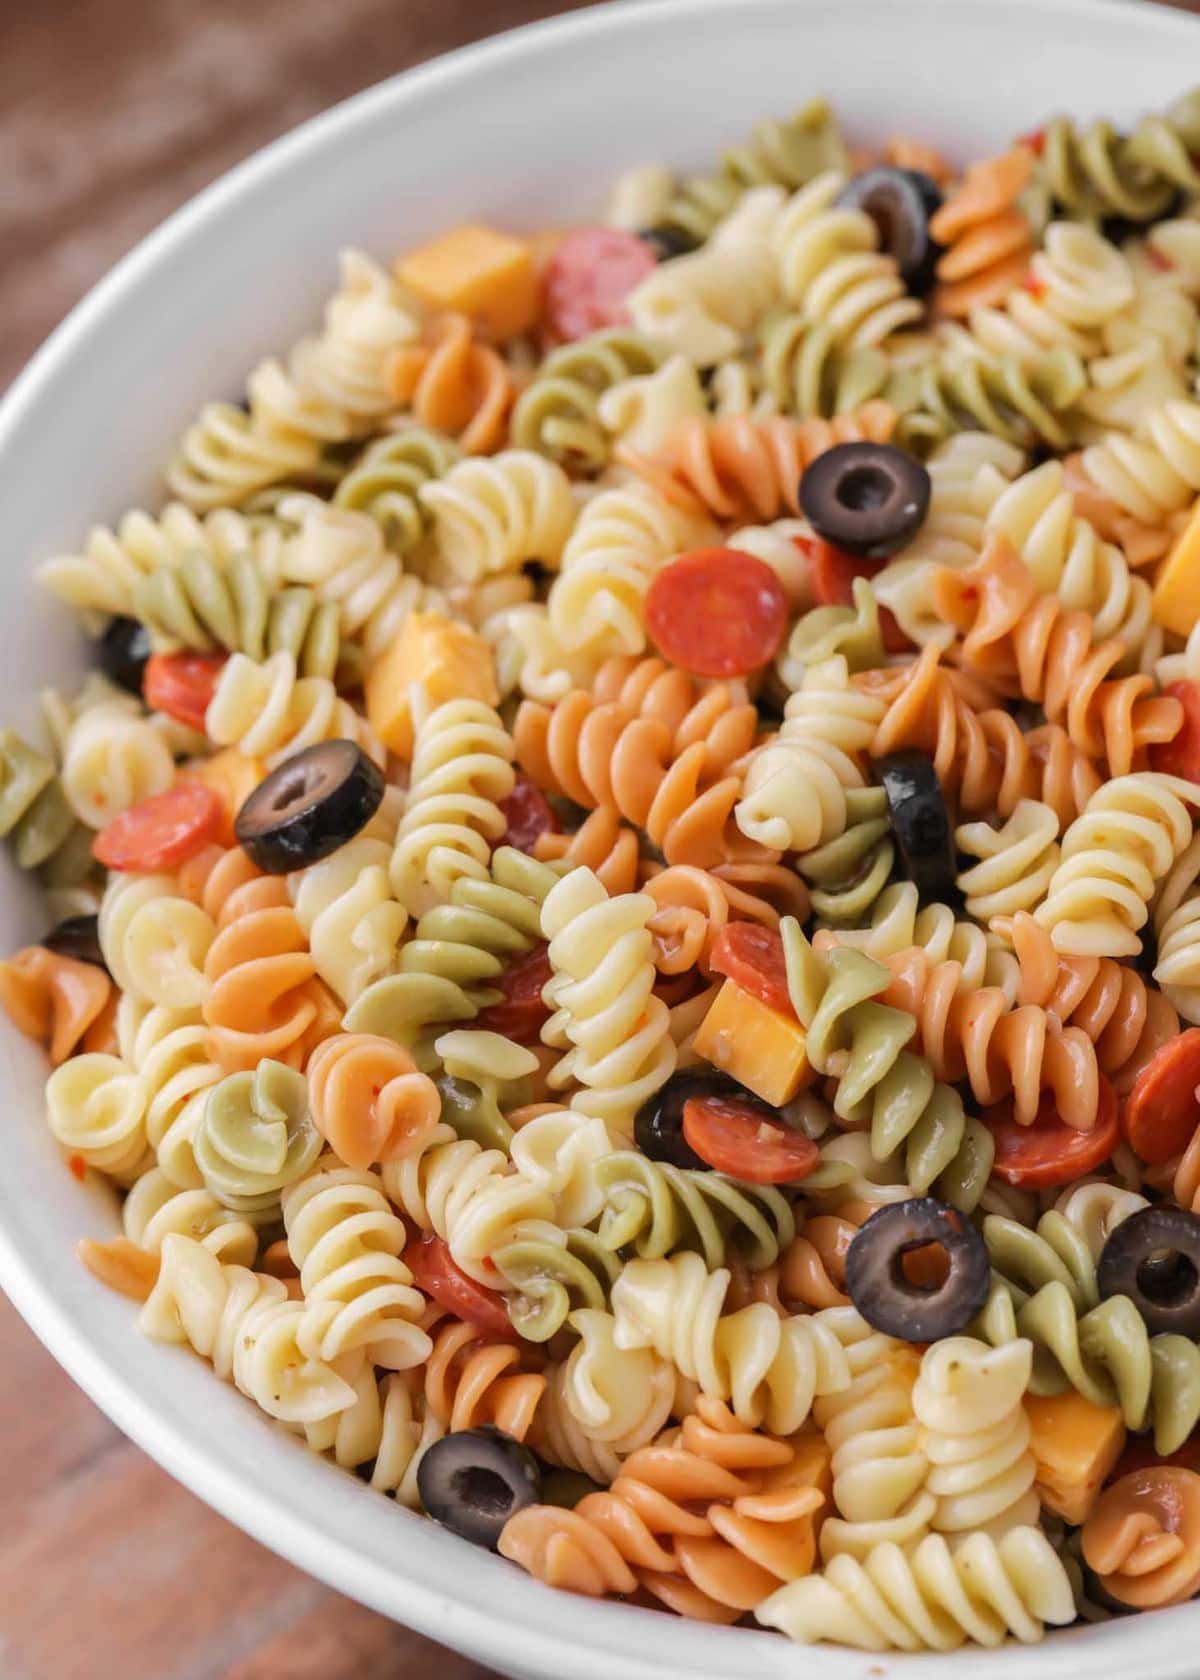 Easy Pasta Salad Recipe With Italian Dressing Video Lil Luna,Oval Office Renovation